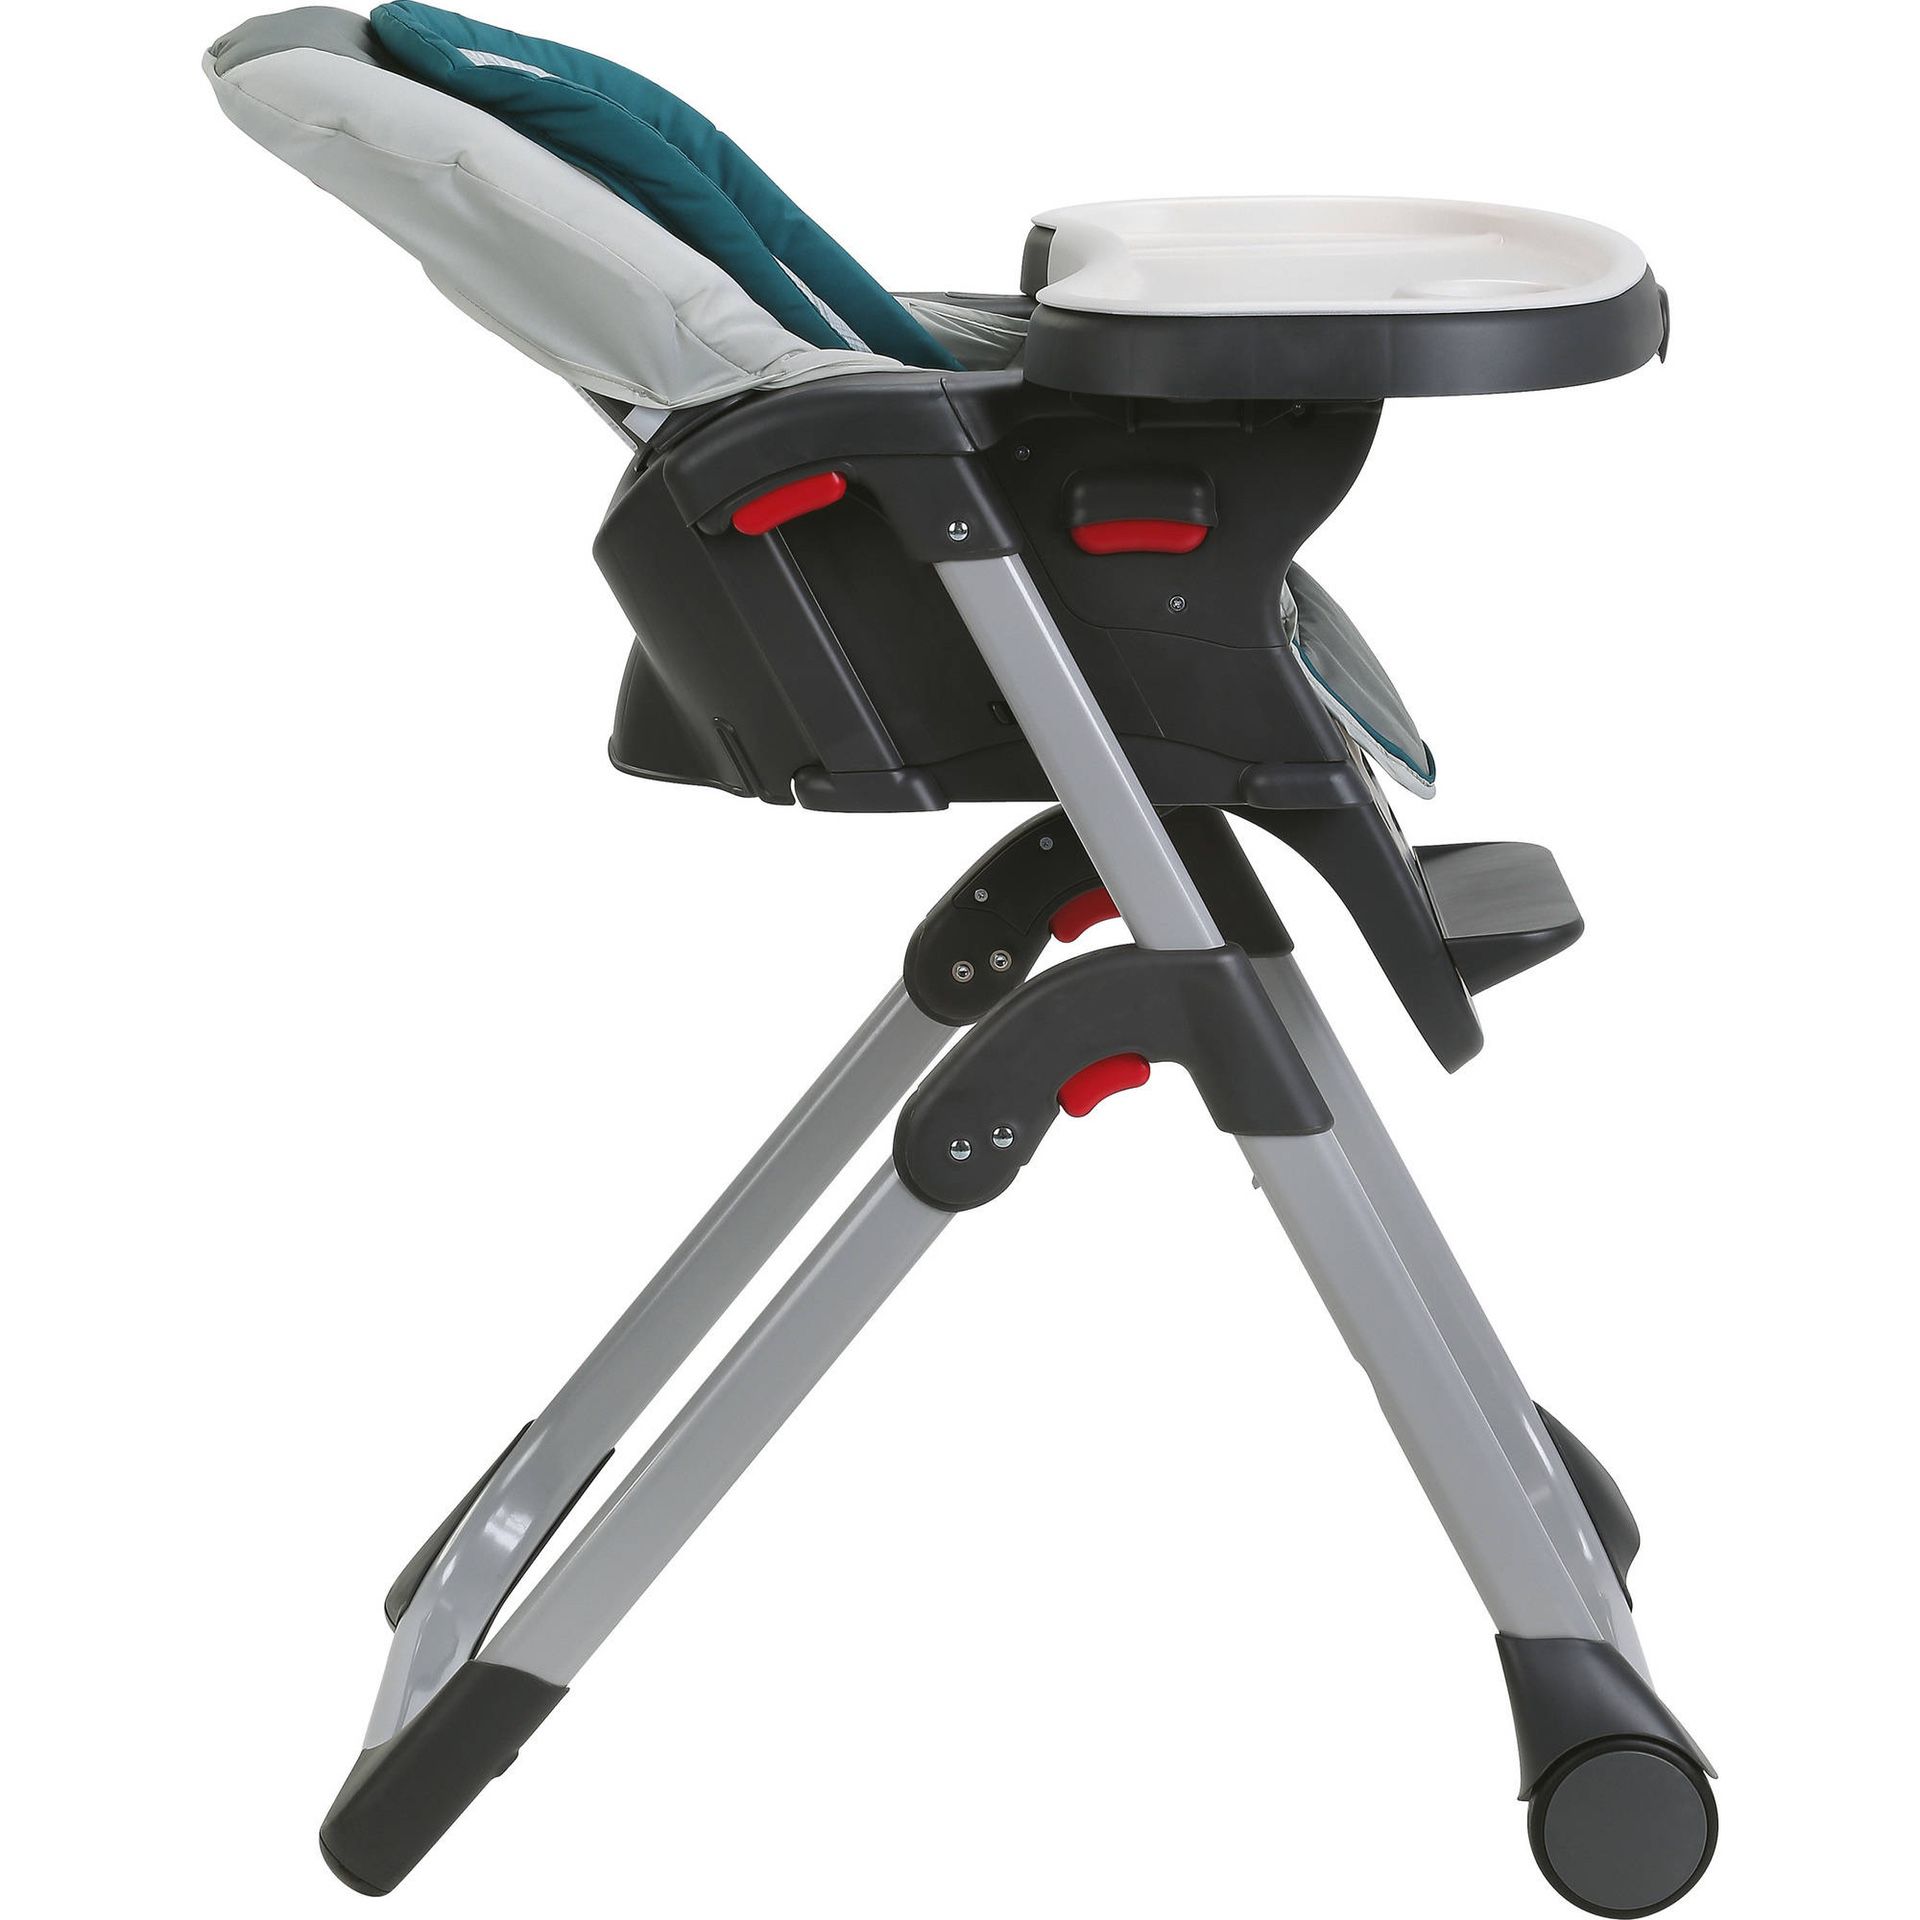 Graco duodiner High chair